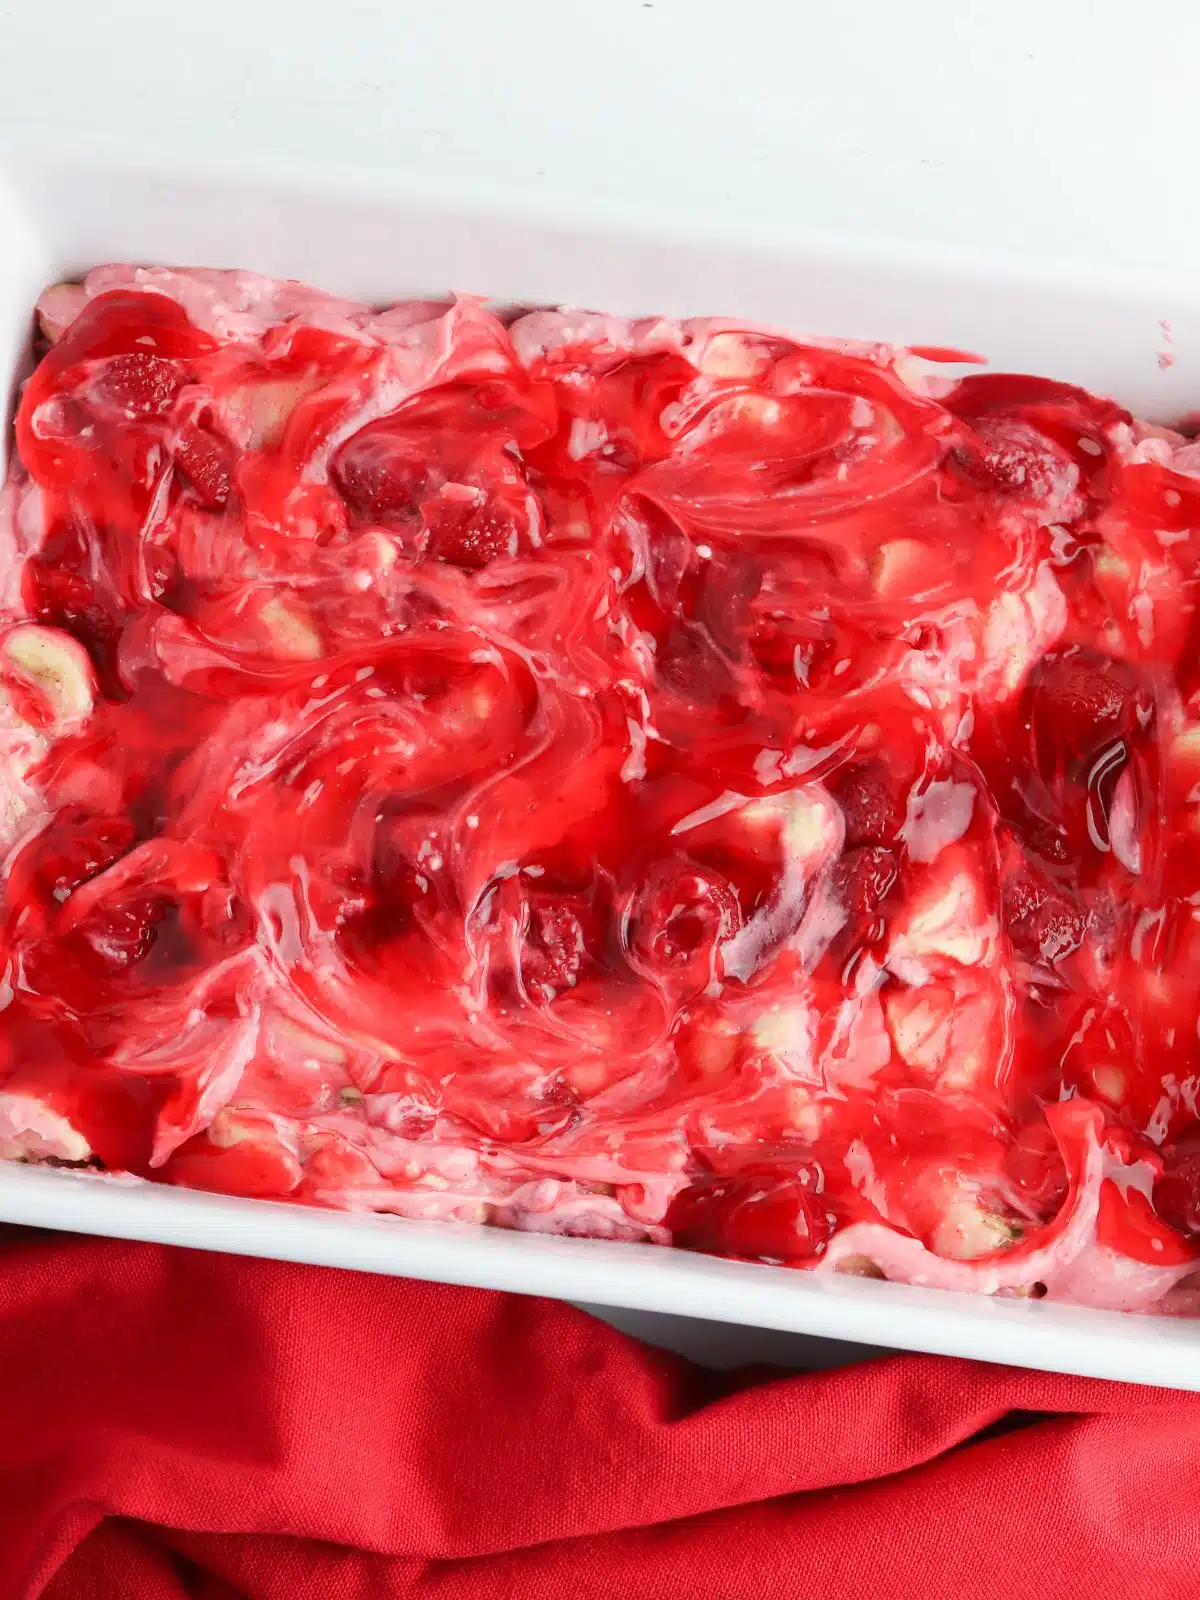 Remaining strawberry pie filling added to the casserole dish